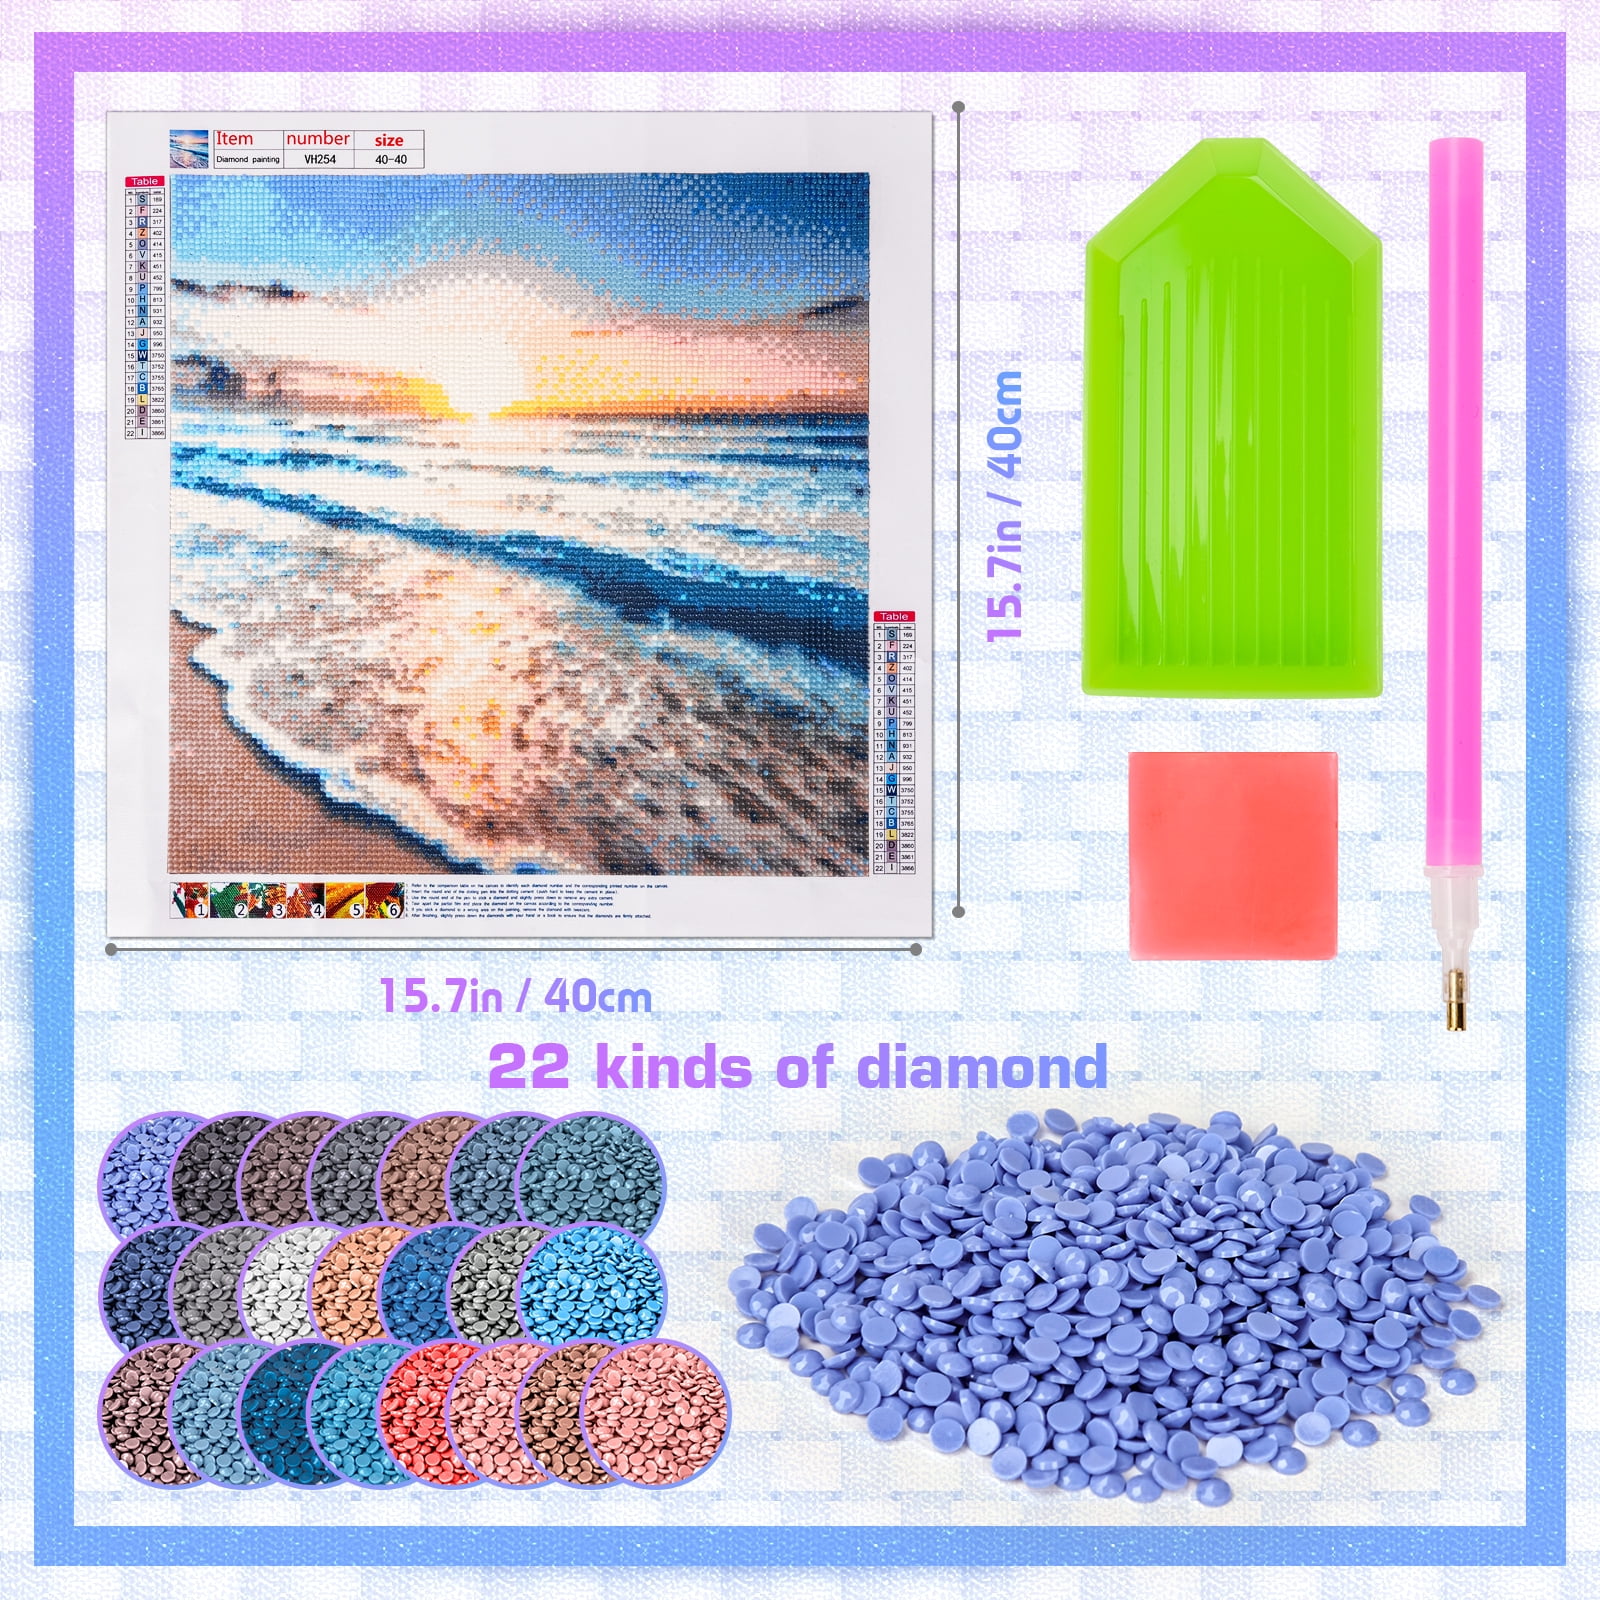 Dream Fun Diamond Art Toys Gifts for 6 7 8 9 10 Years Old Girls boys  Adults, Diamond Arts and Crafts for Kids Age 9 10 11 12, Accessories for  Teenage